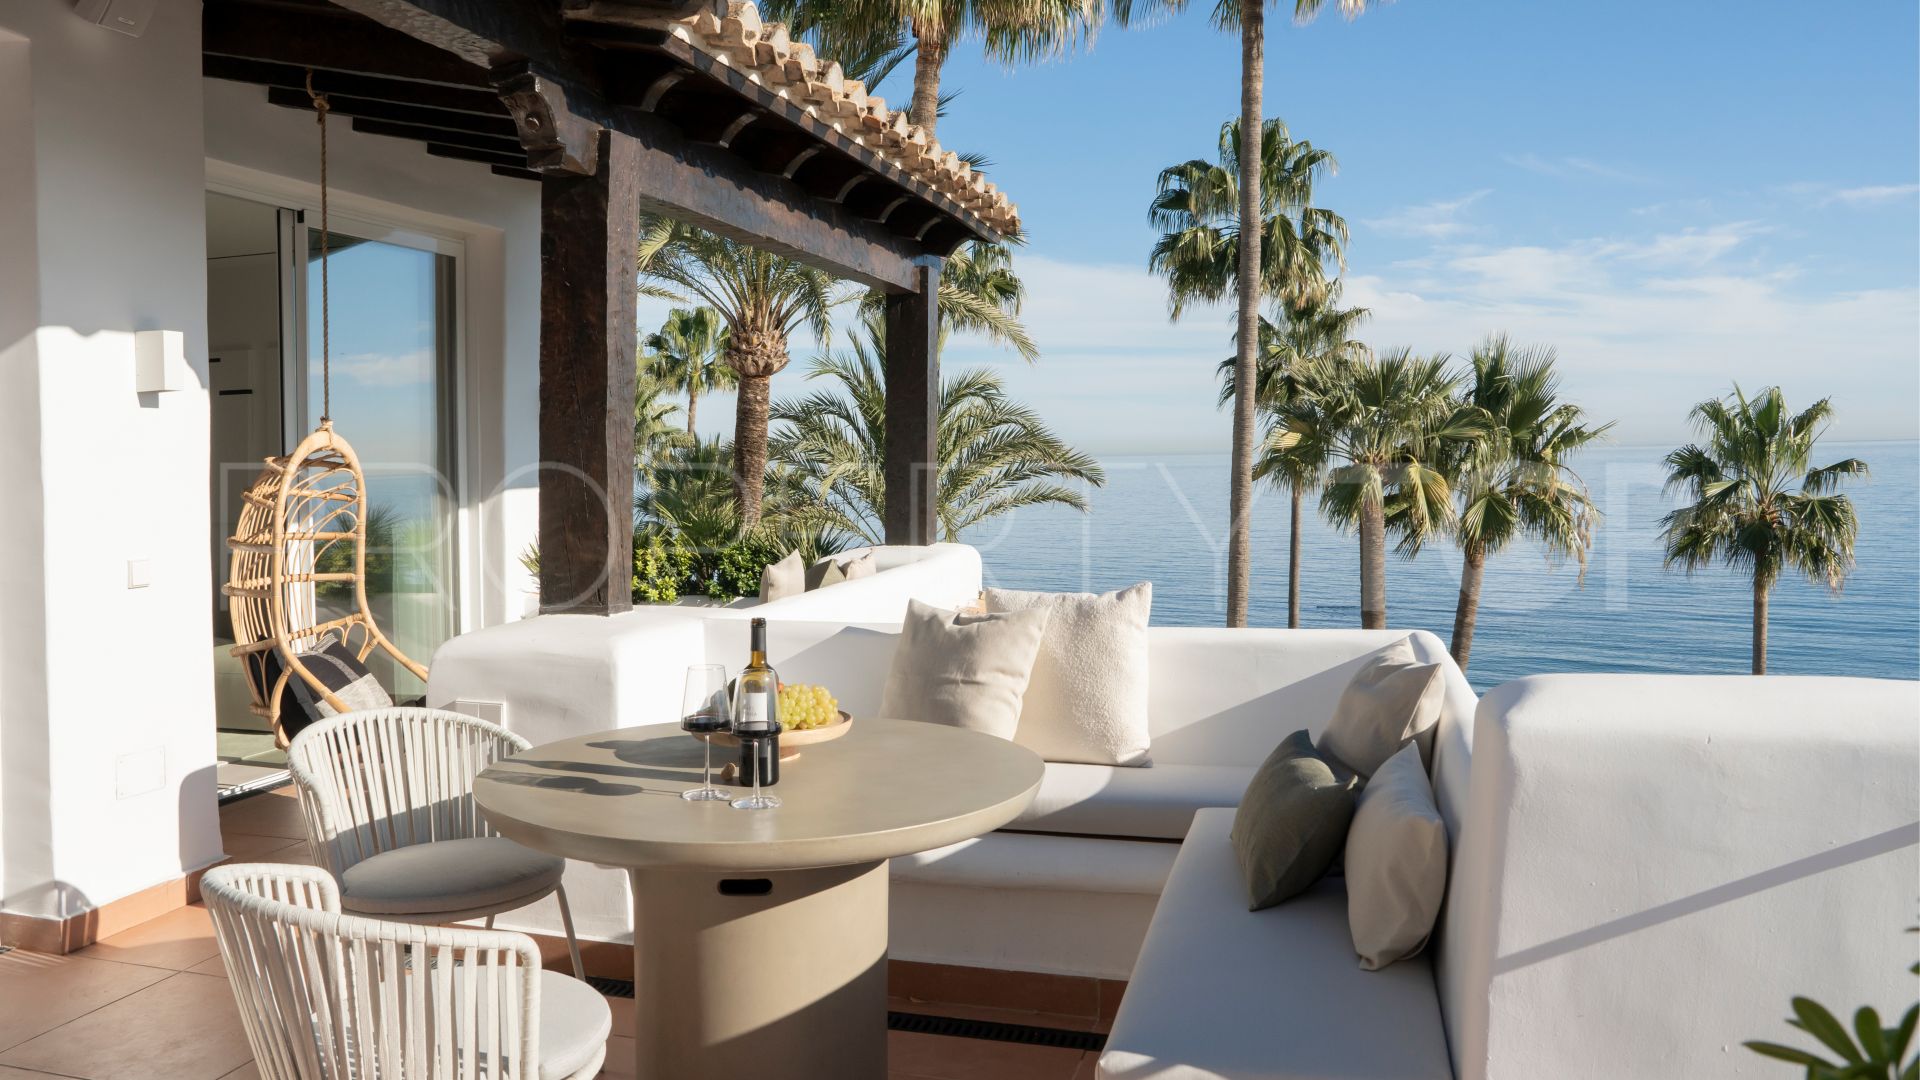 For sale 2 bedrooms penthouse in Estepona